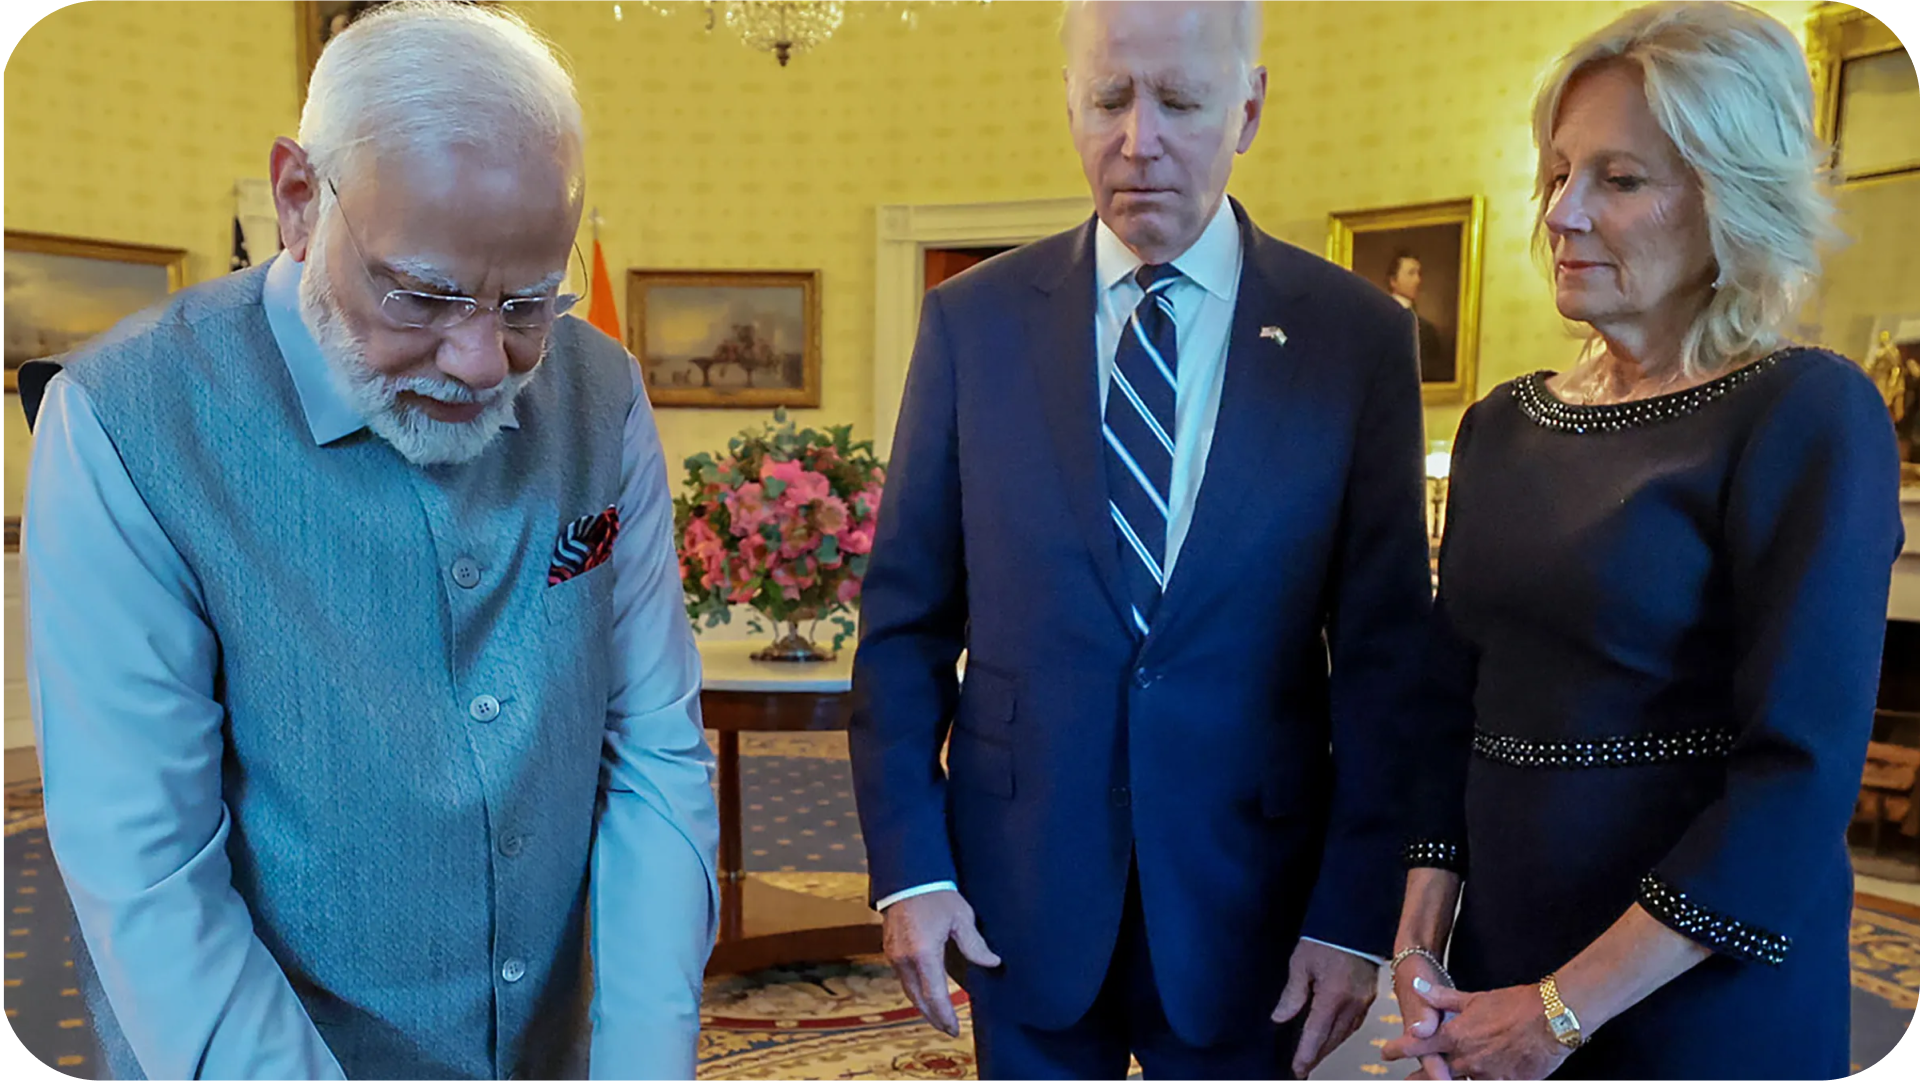 Prime Minister Modi's Thoughtful Gesture: A 7.5ct LGD Gift to First Lady Jill Biden